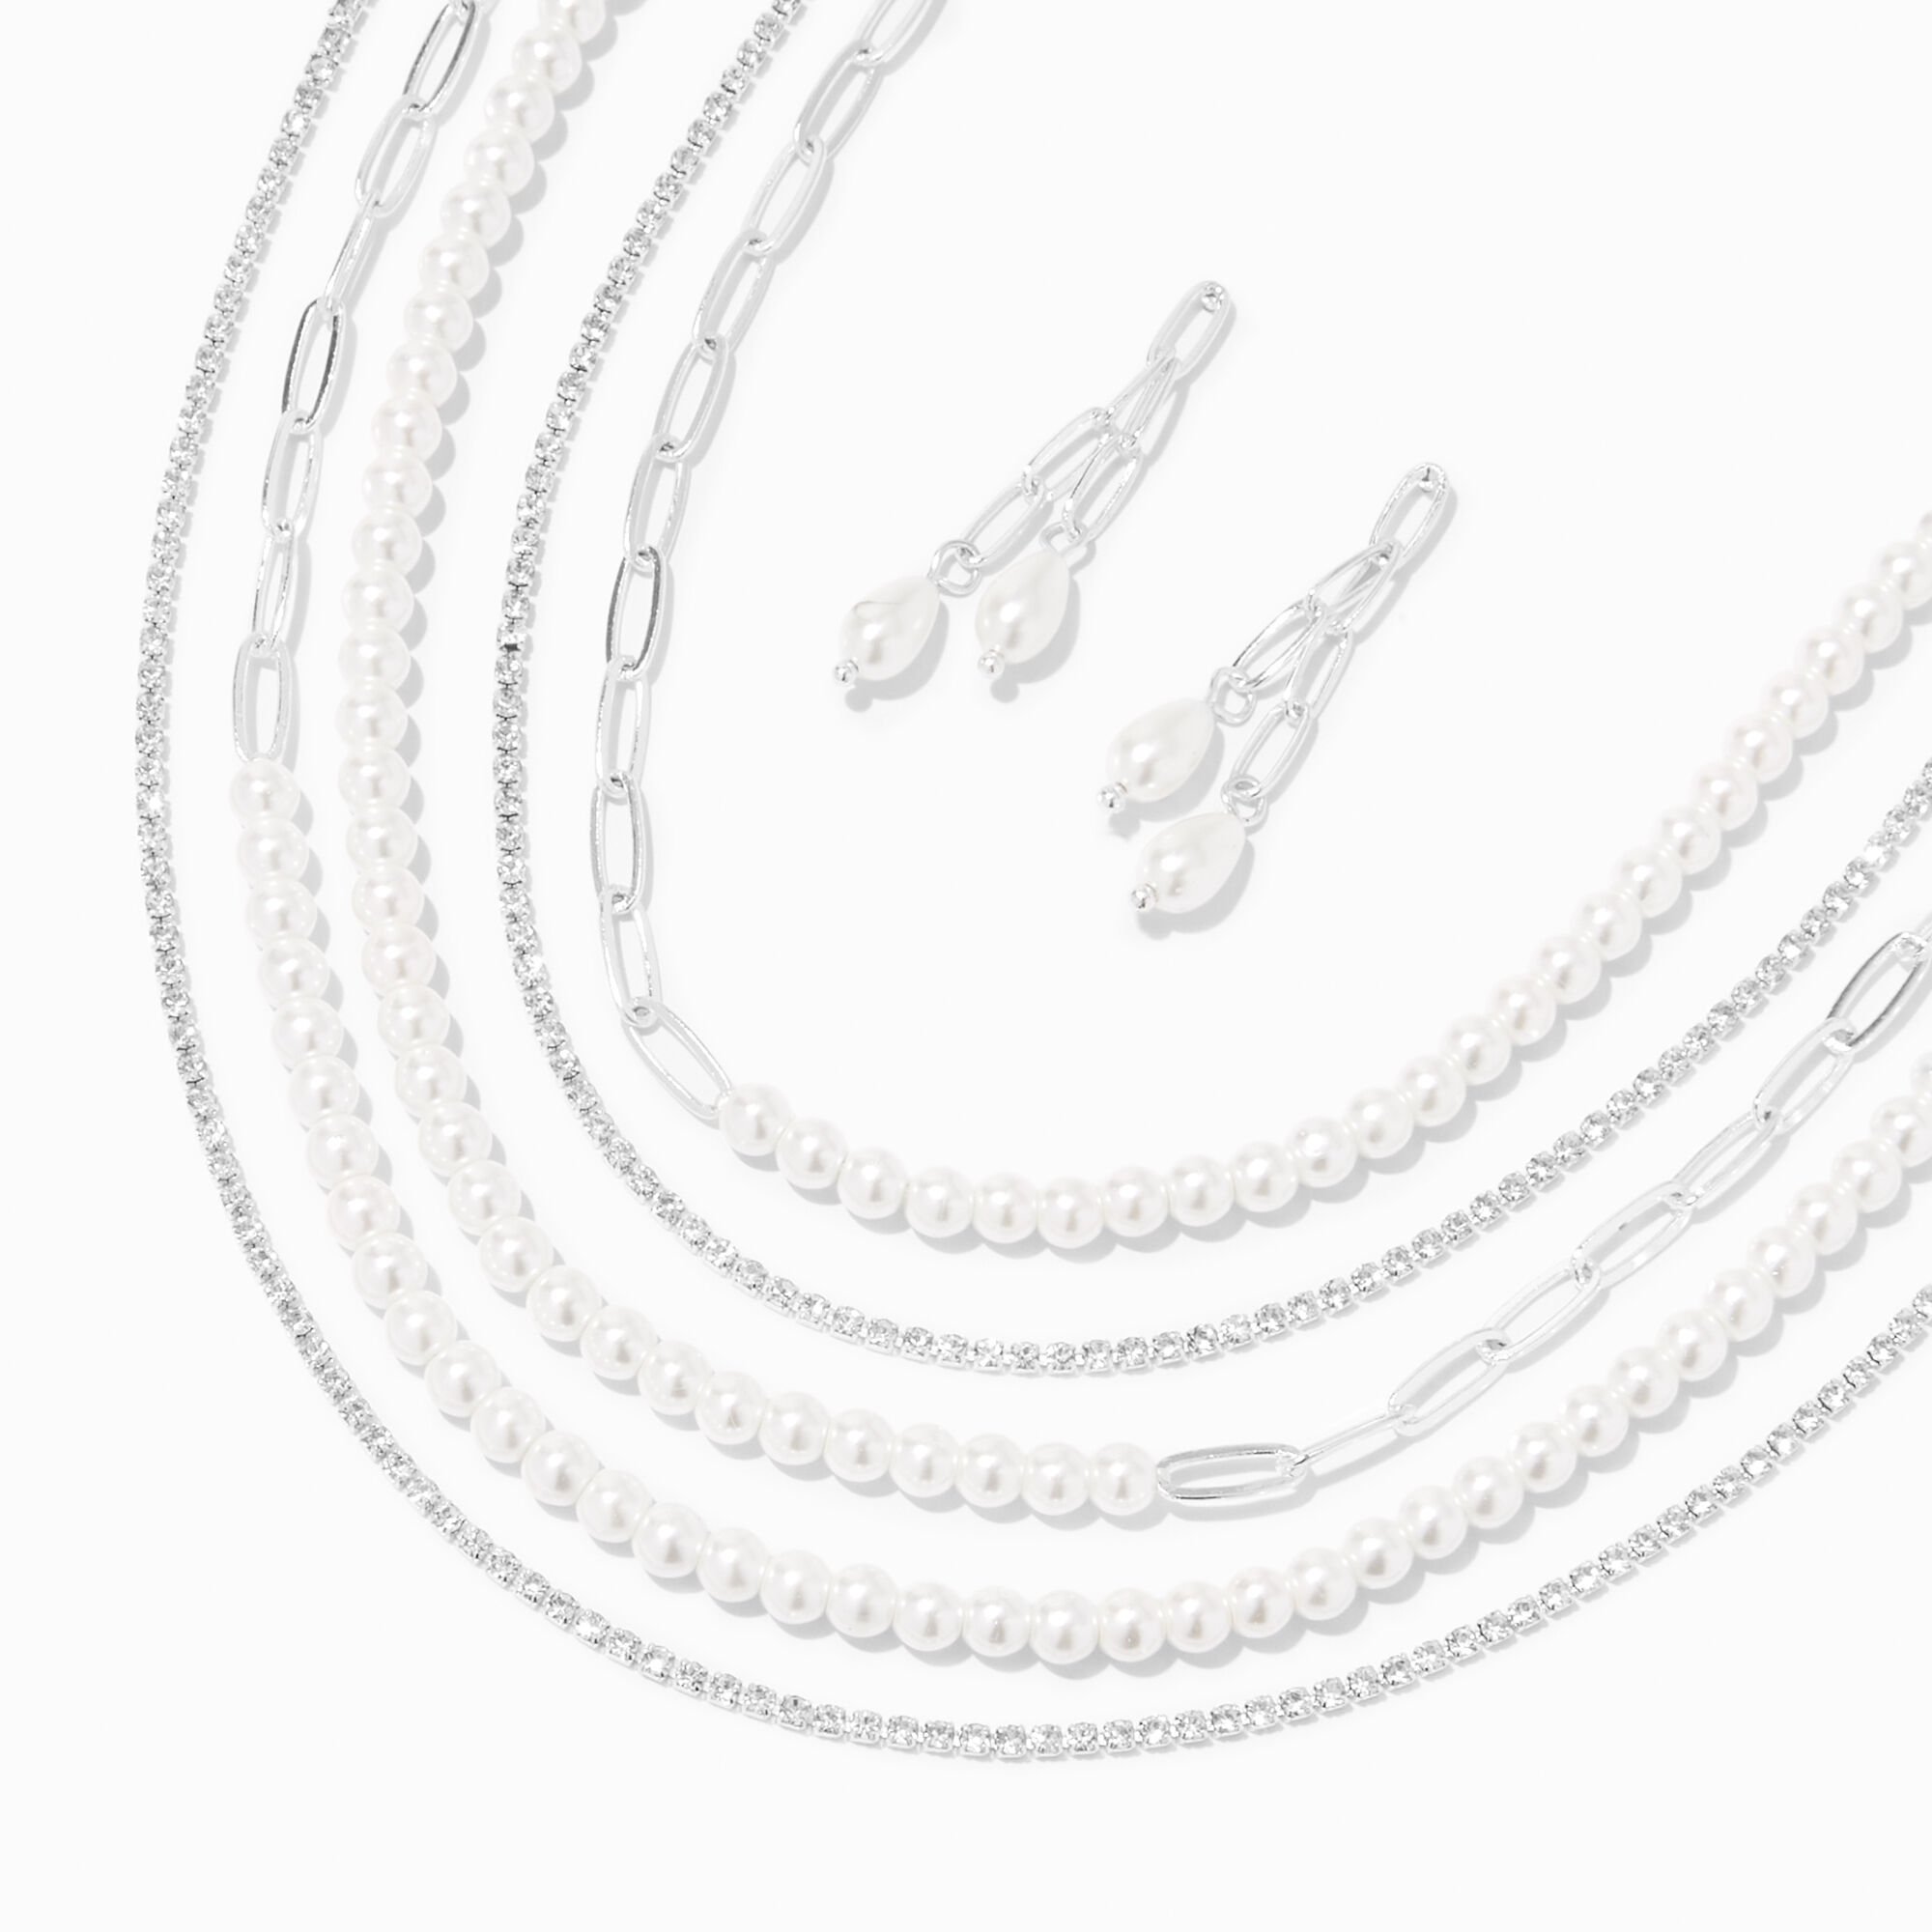 View Claires Tone Pearl Multi Strand Paperclip Jewelry Set 2 Pack Silver information